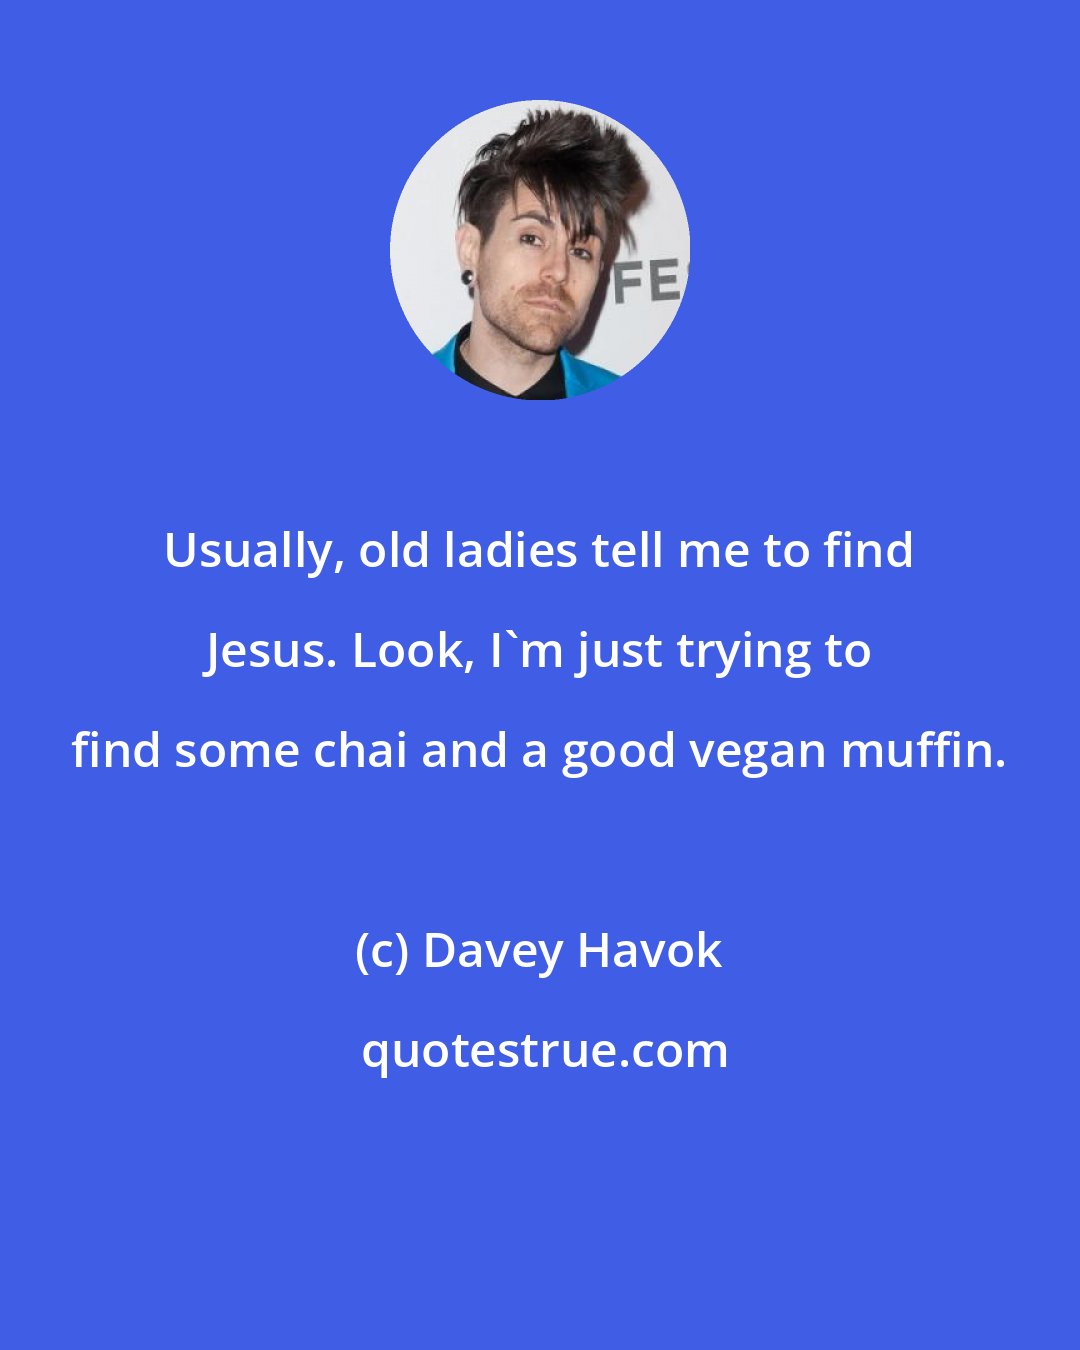 Davey Havok: Usually, old ladies tell me to find Jesus. Look, I'm just trying to find some chai and a good vegan muffin.